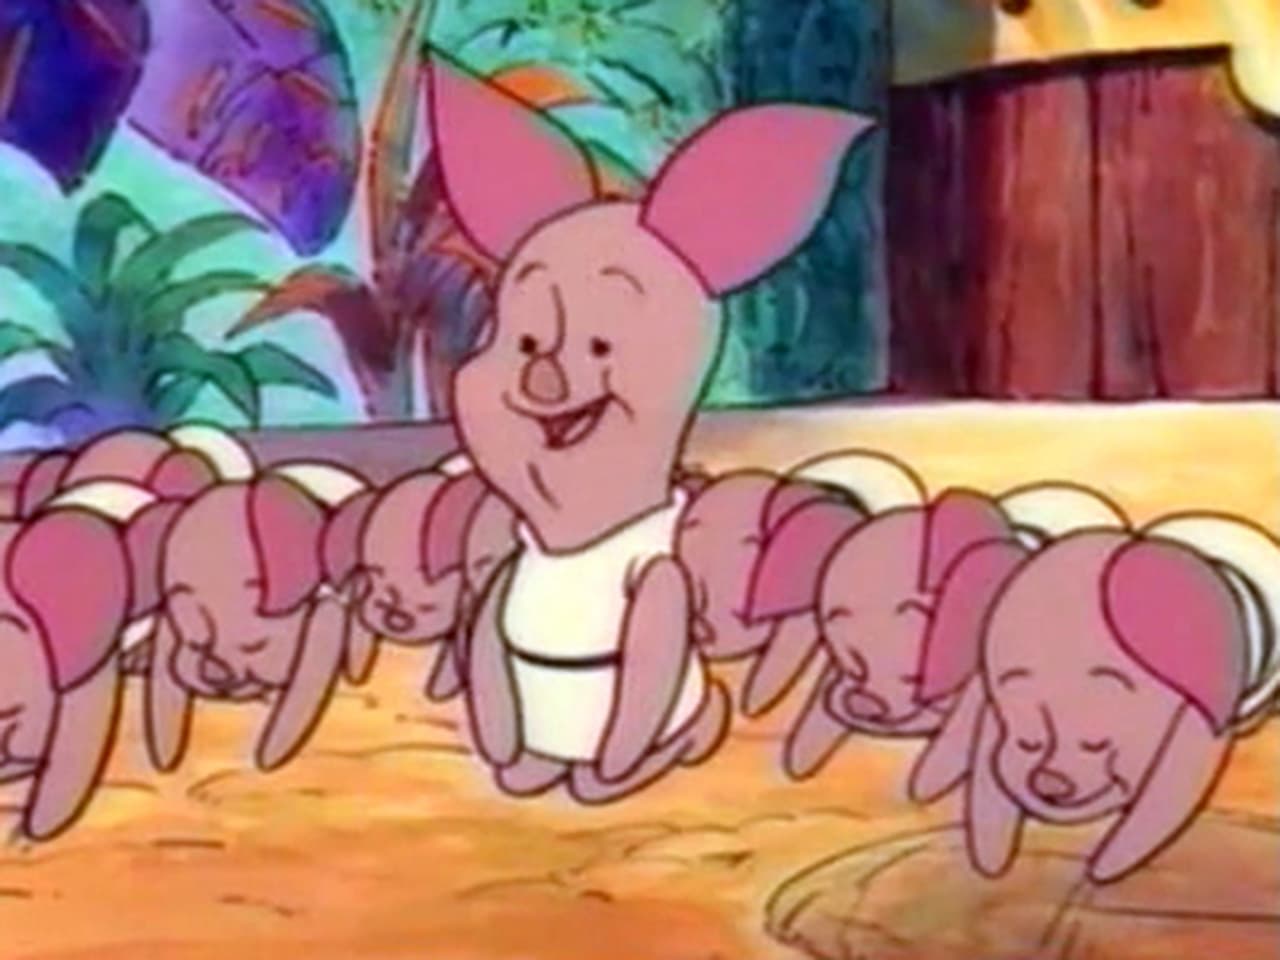 The New Adventures of Winnie the Pooh - Season 1 Episode 7 : The Piglet Who Would Be King